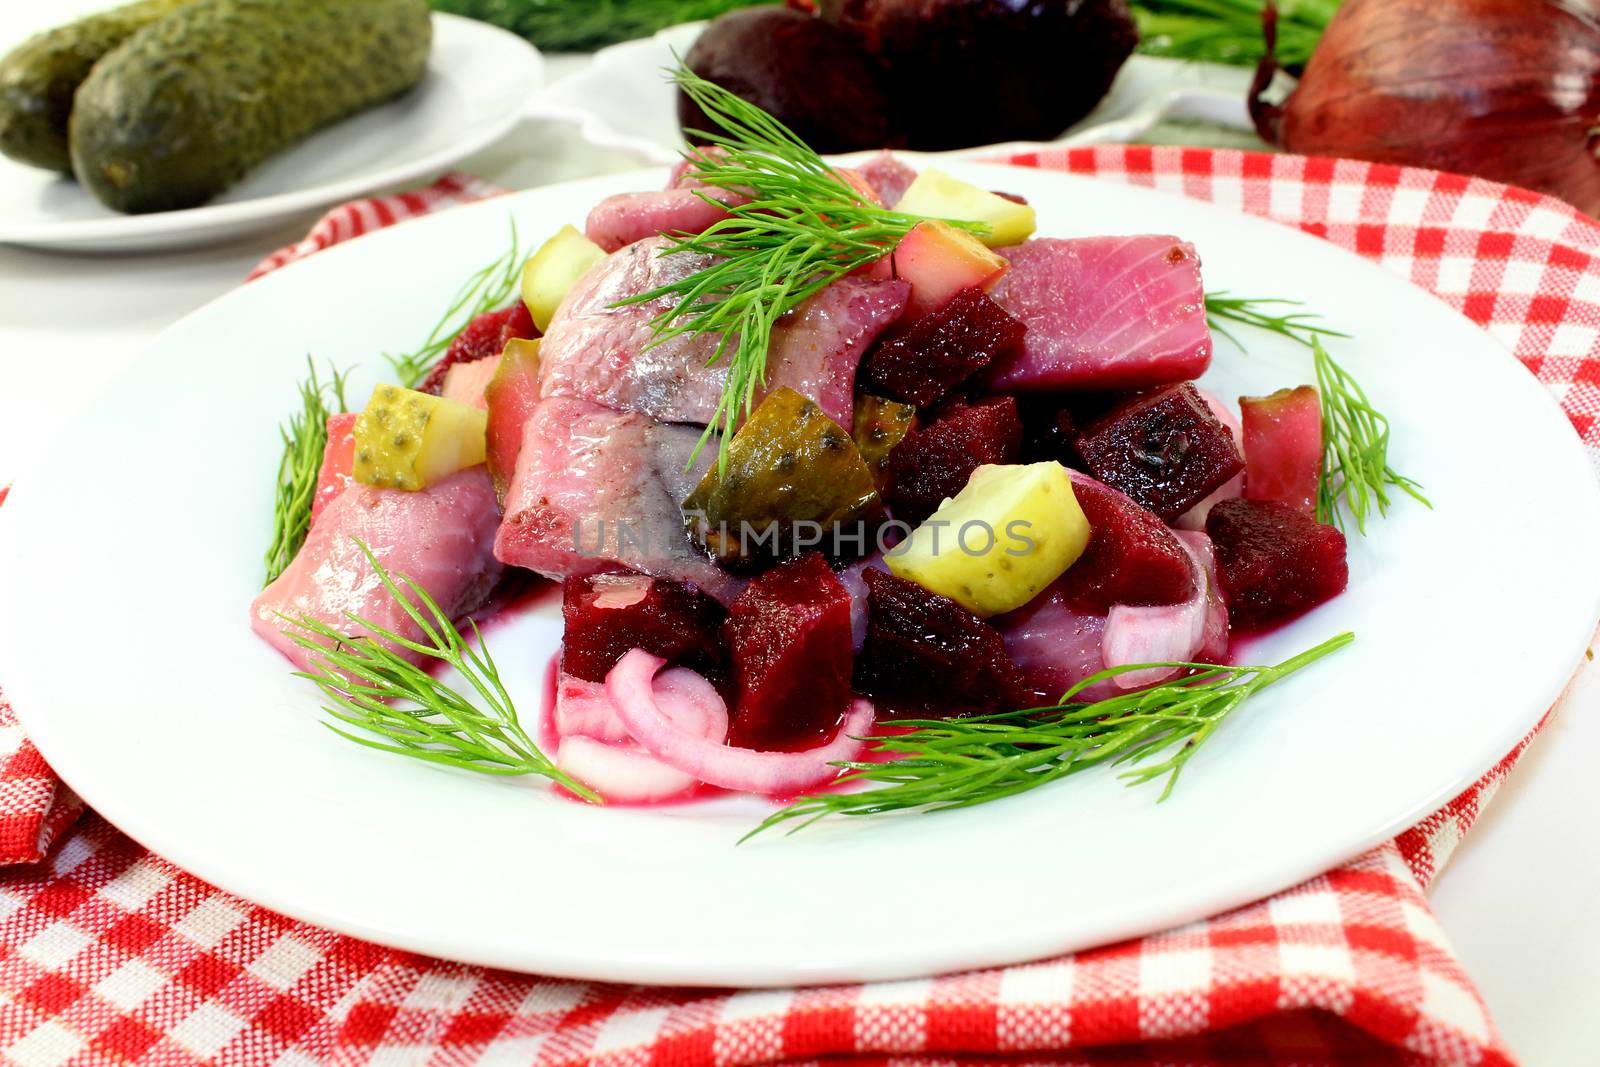 Young herring salad by silencefoto